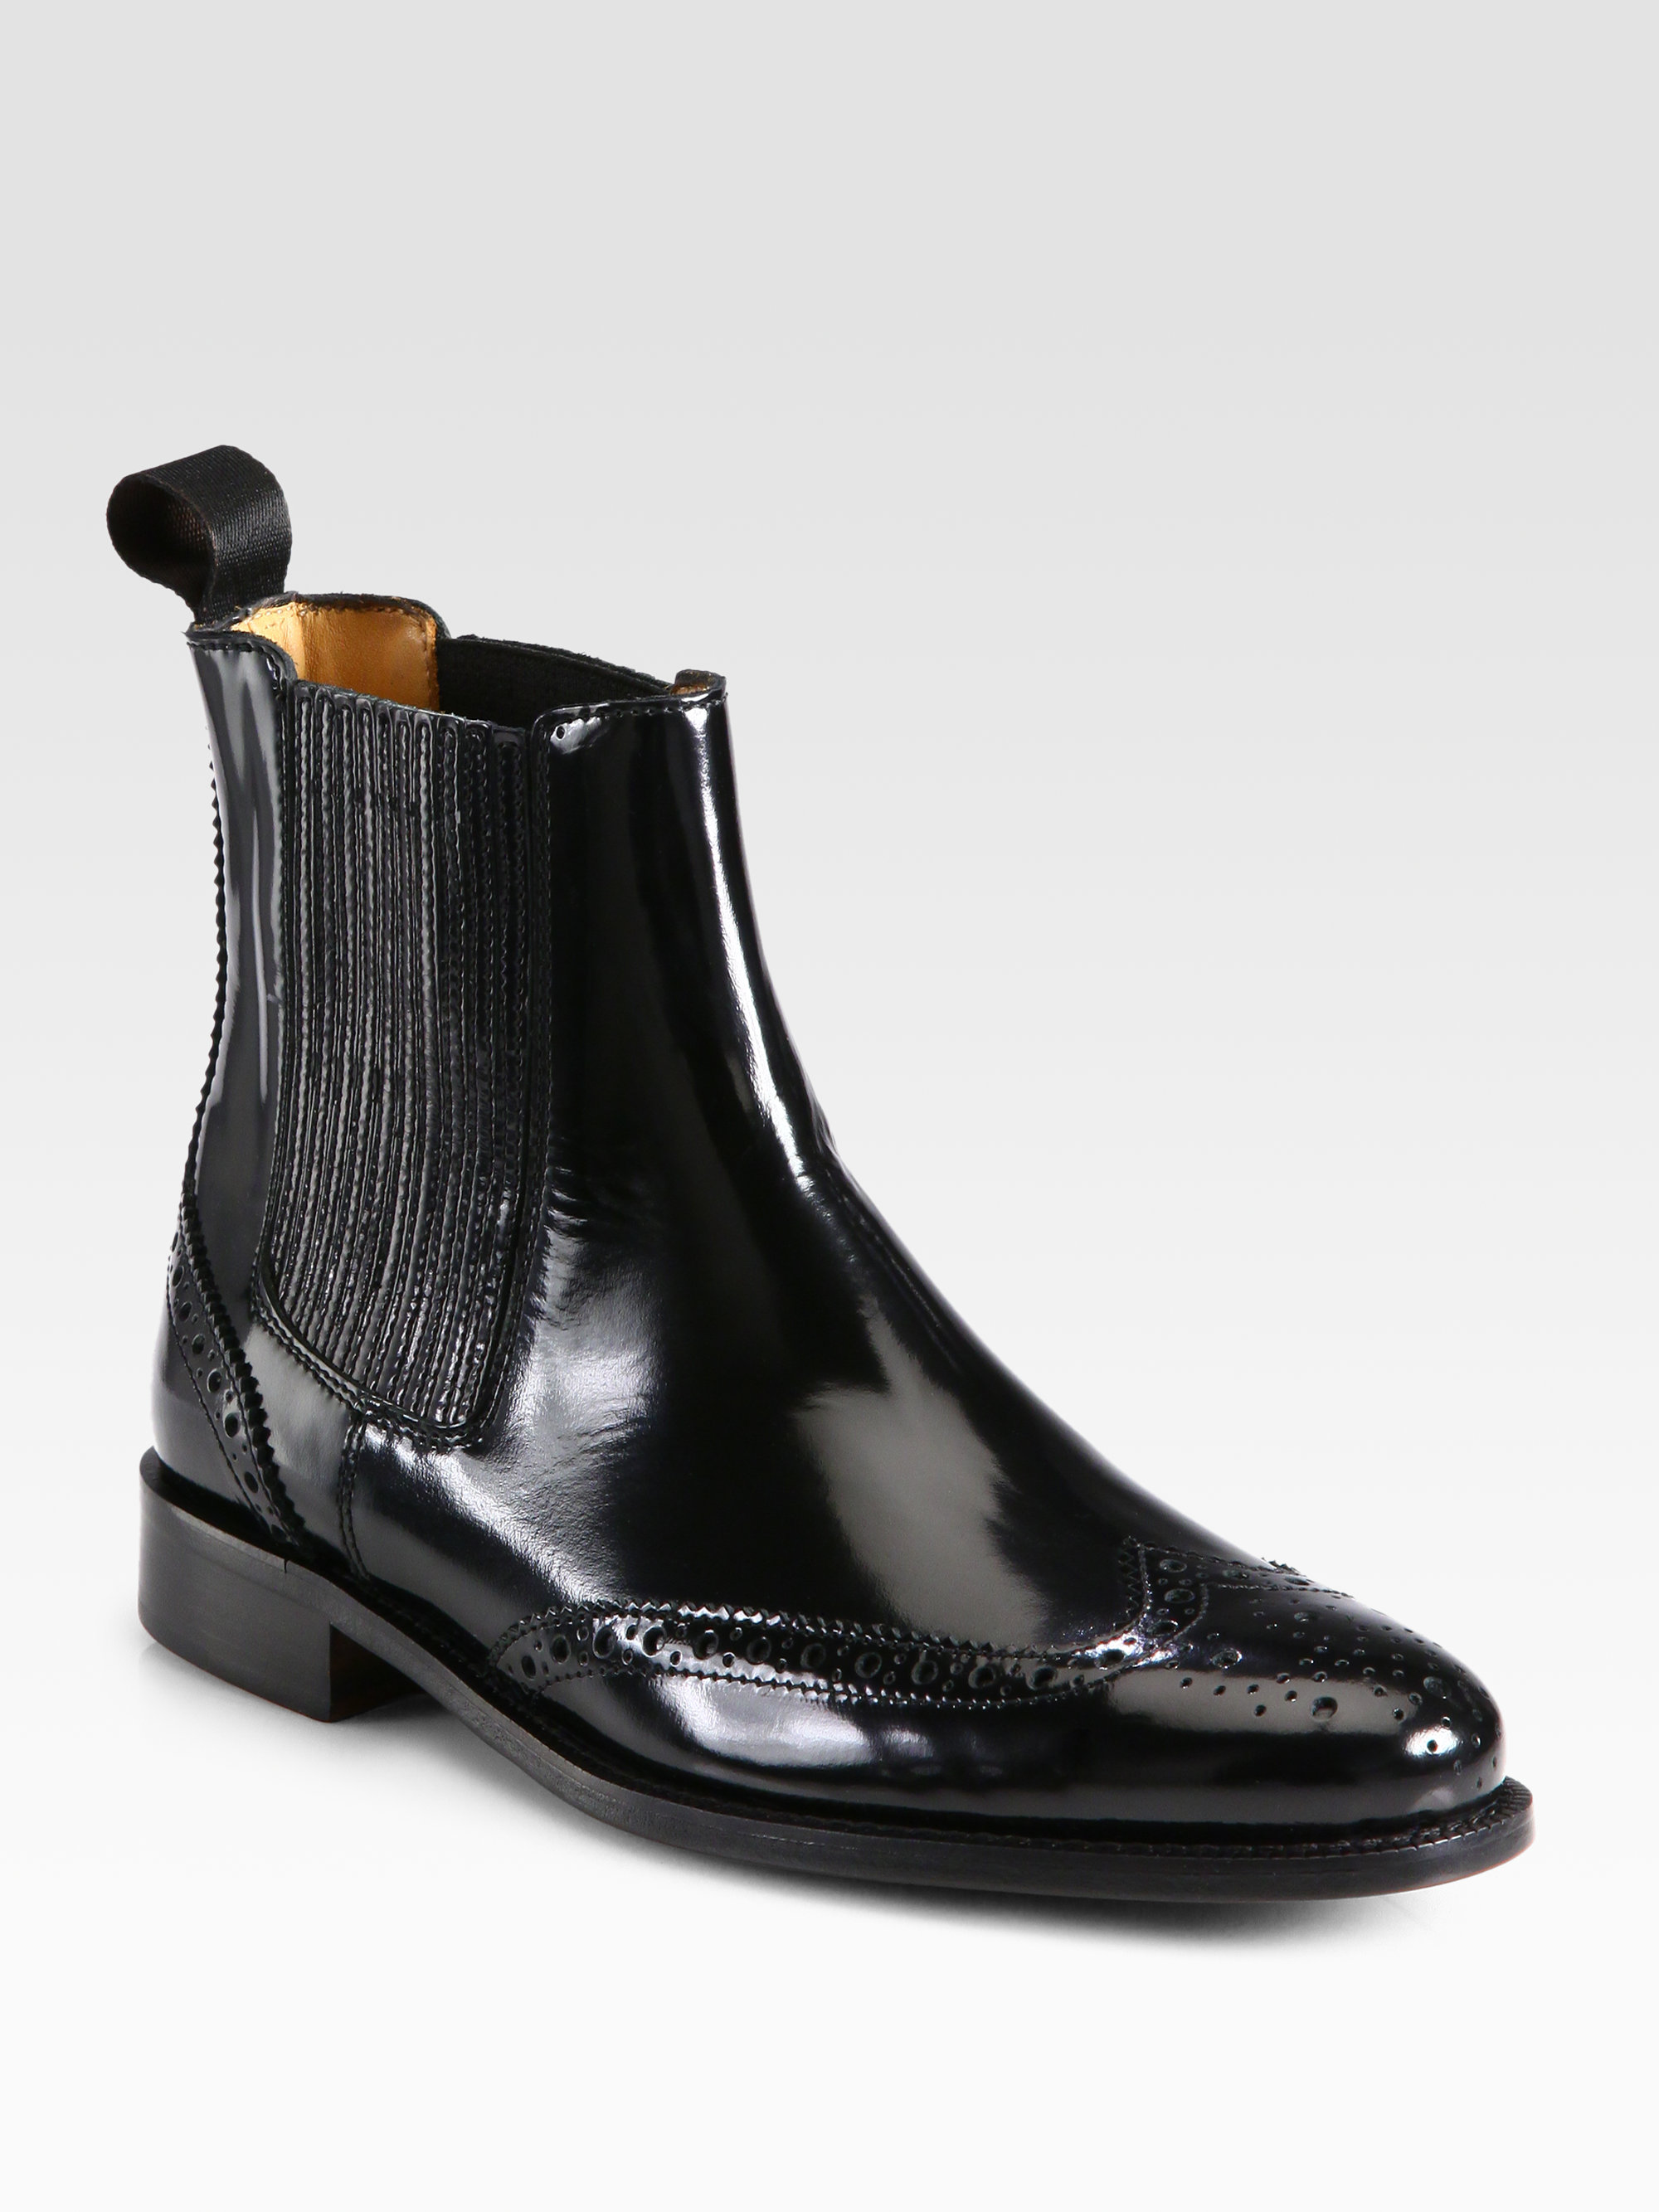 Burberry Gwendoline Patent Leather Ankle Boots in Black | Lyst